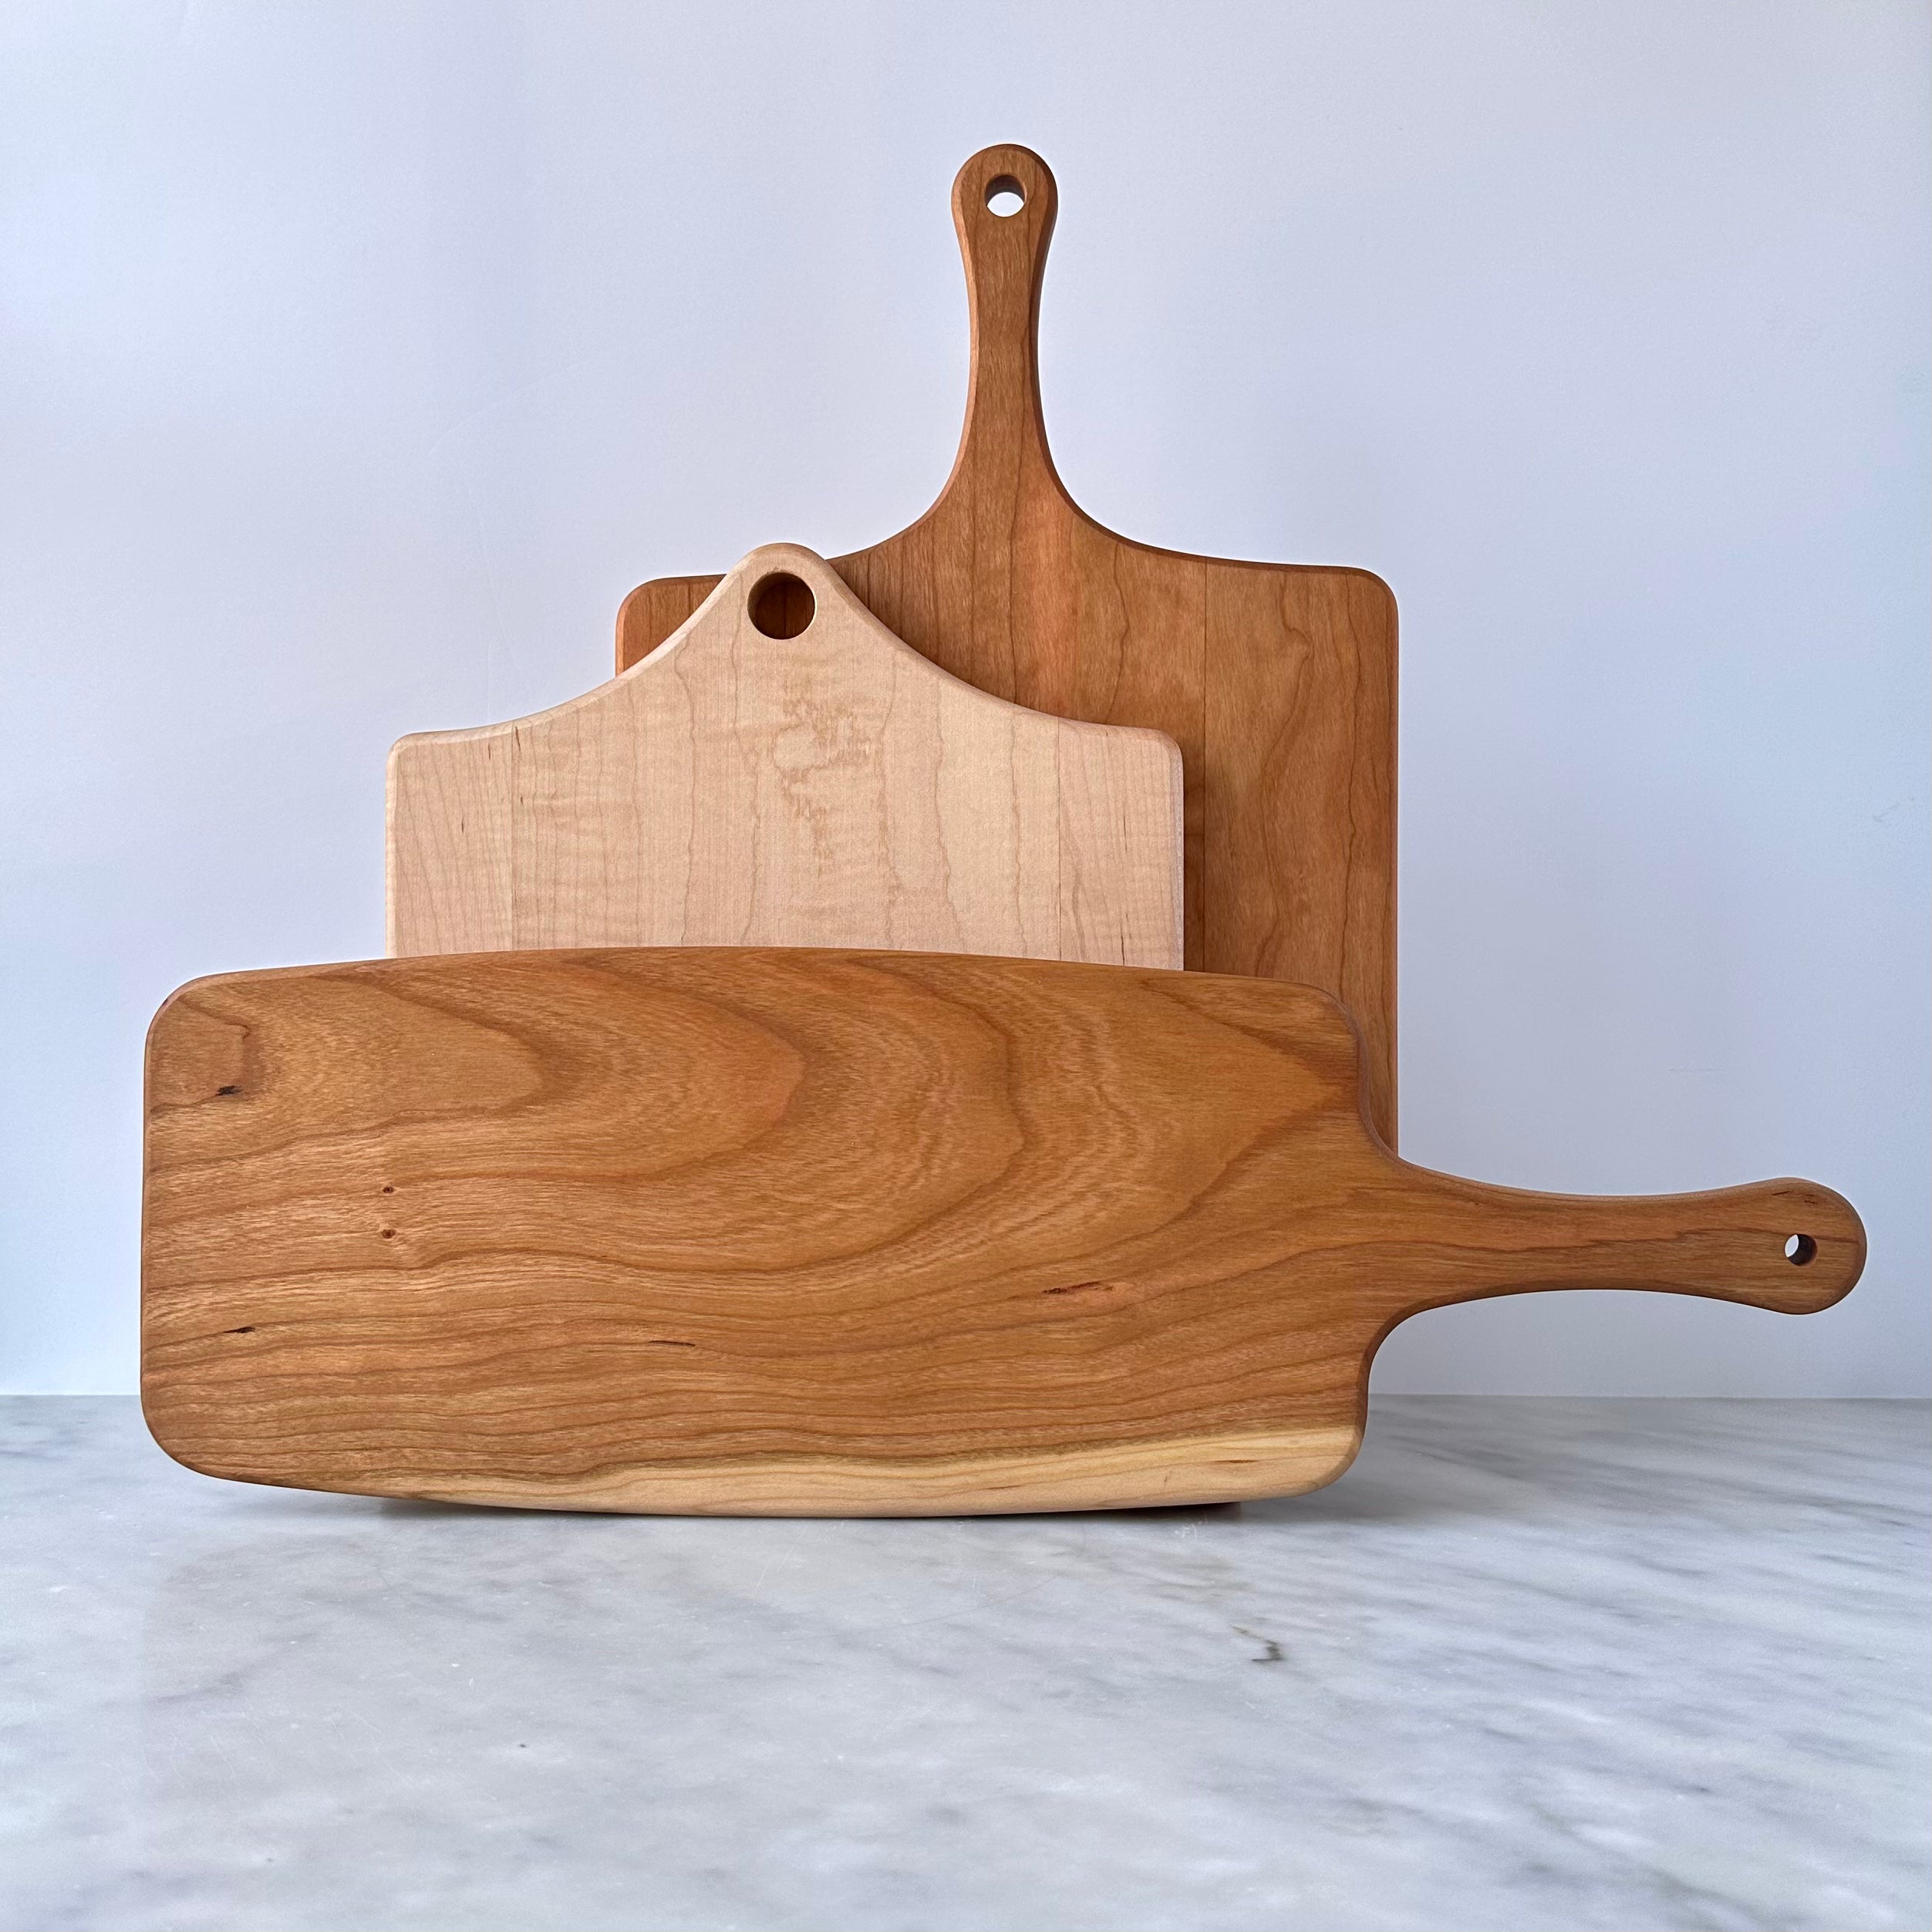 Small Paddle Wood Cutting Board with Handle